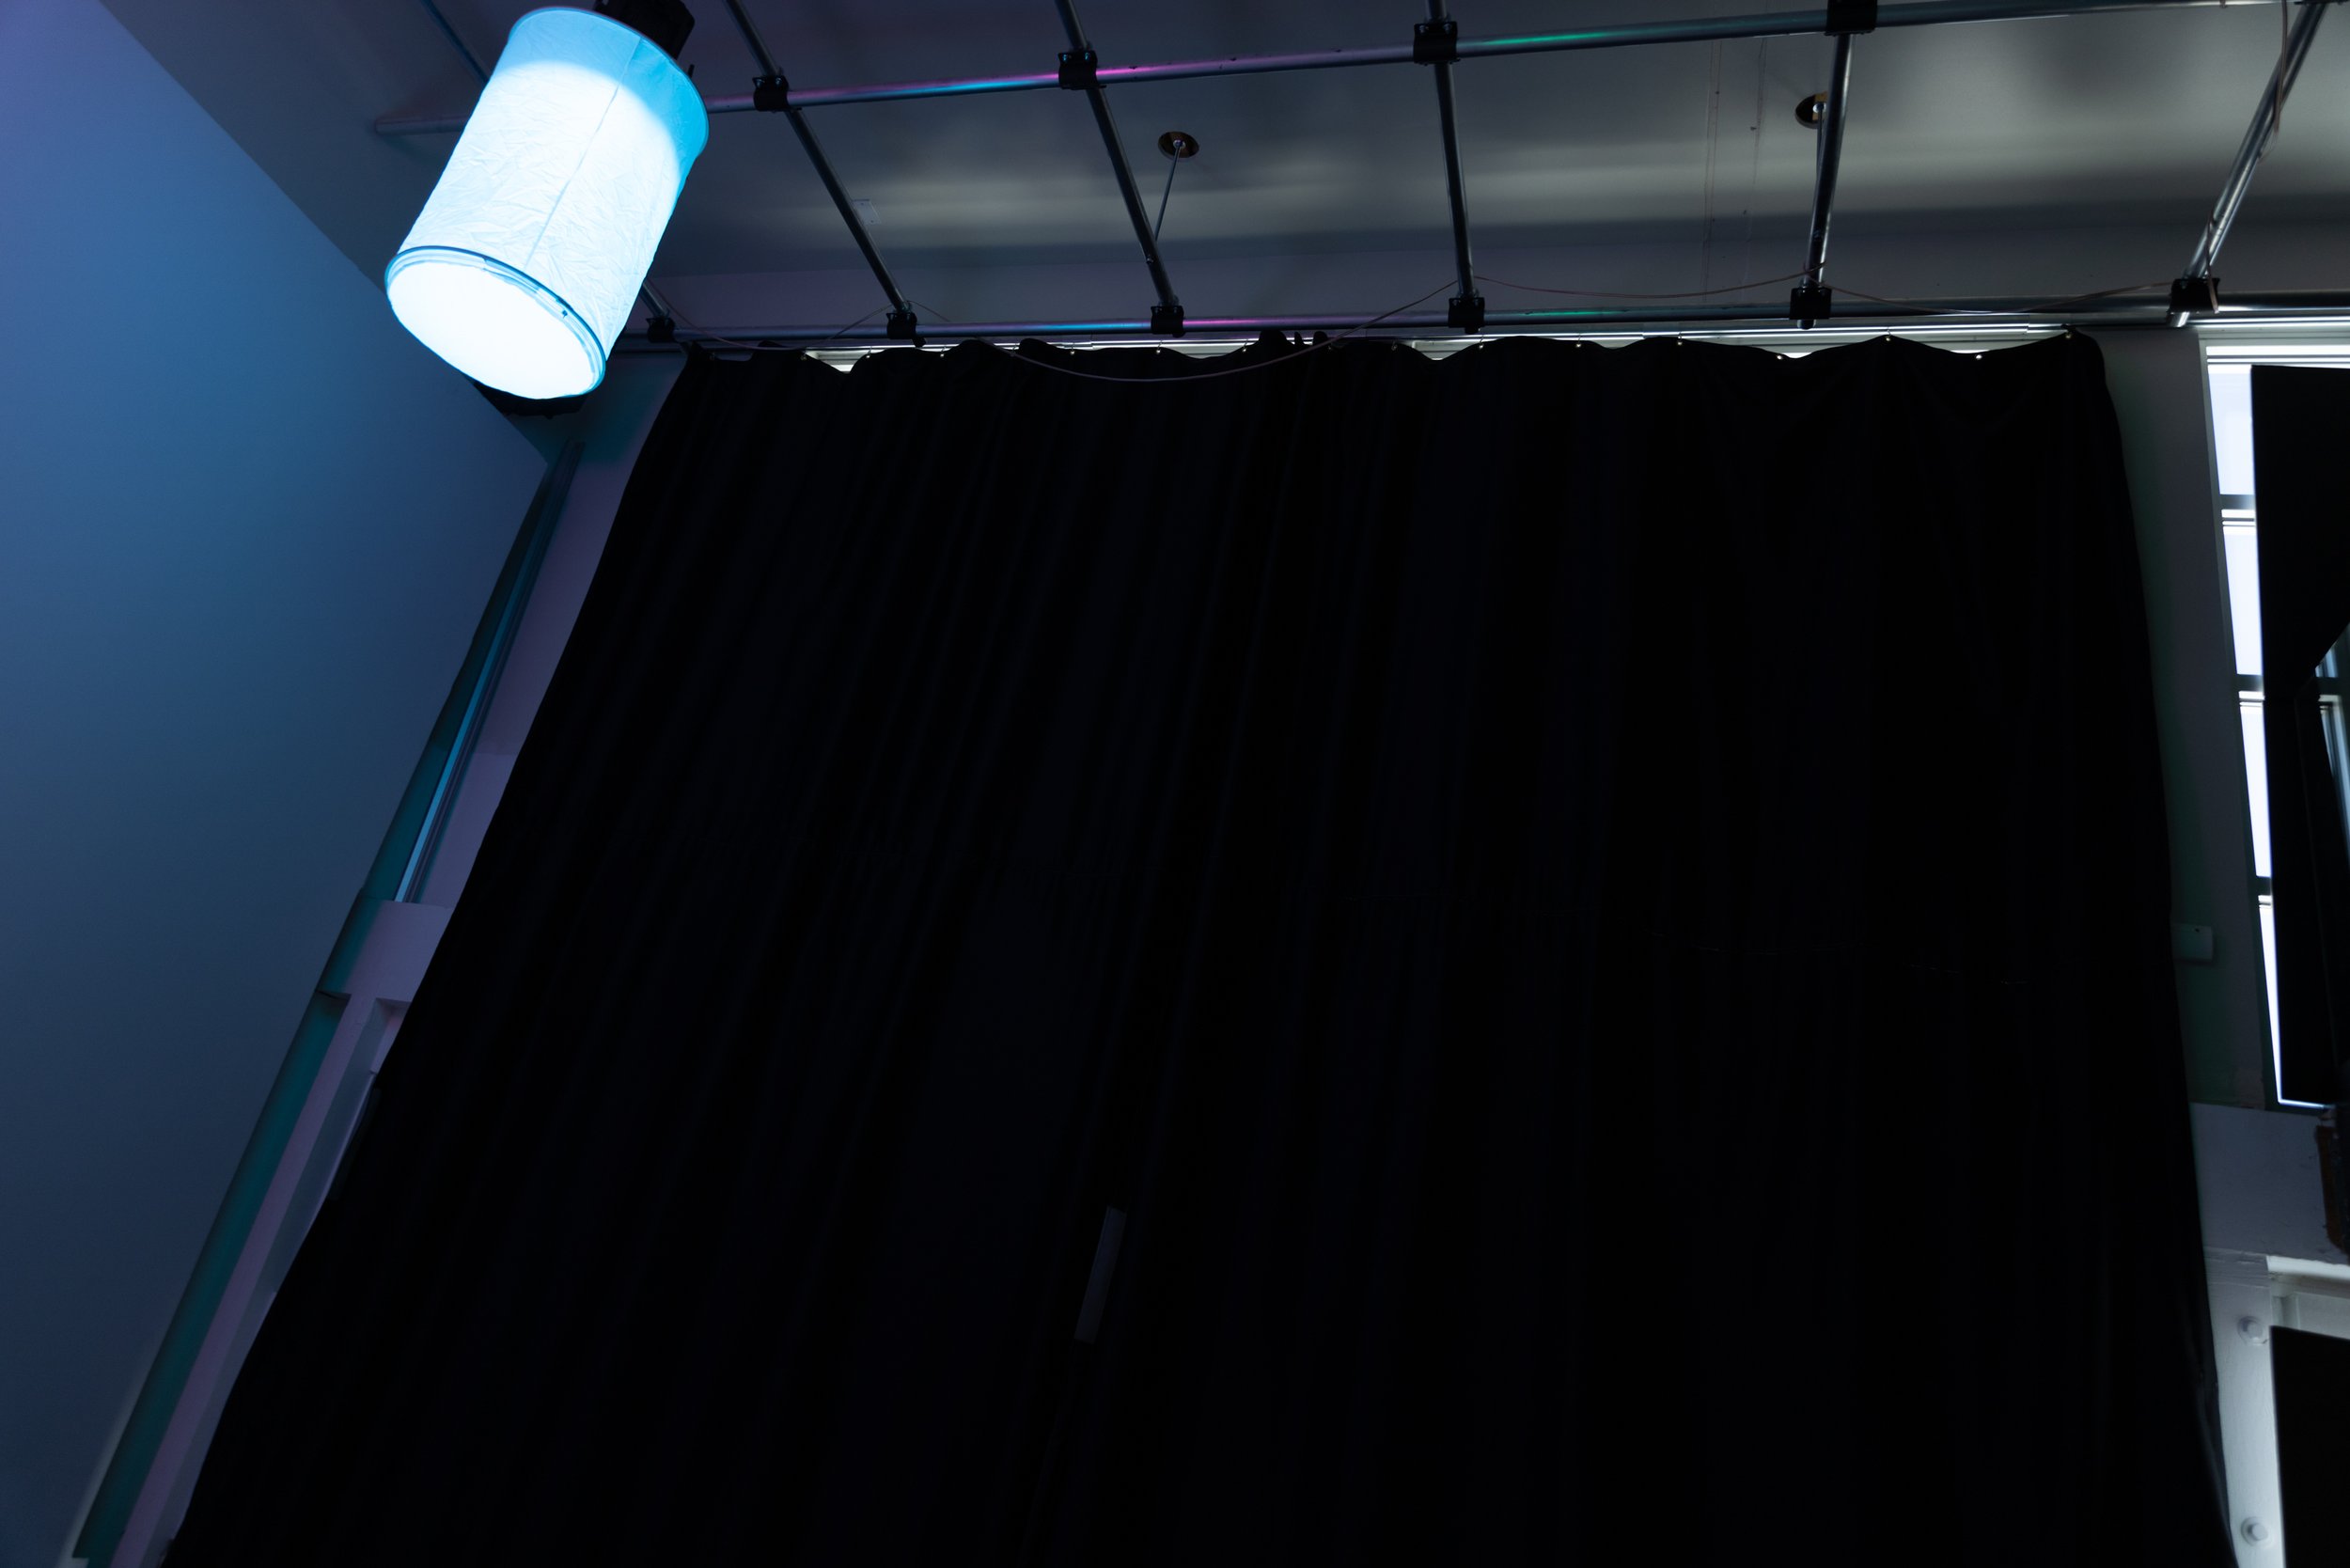 Black Out Curtains Available to completely control lighting